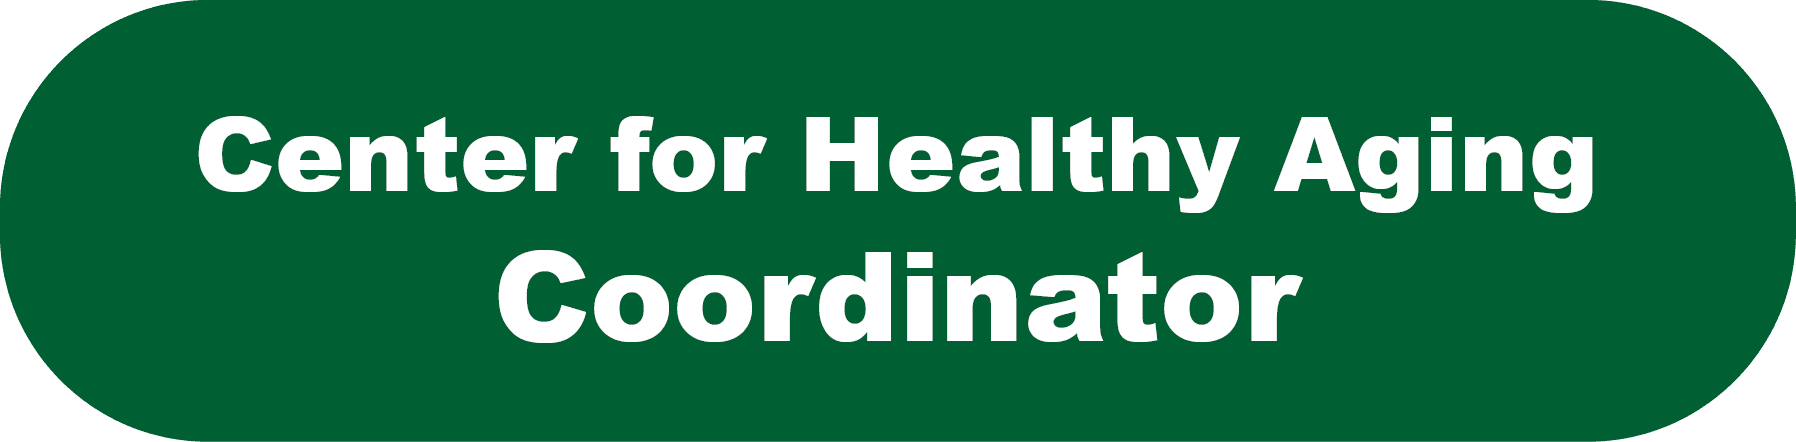 Center for Healthy Aging Coordinator